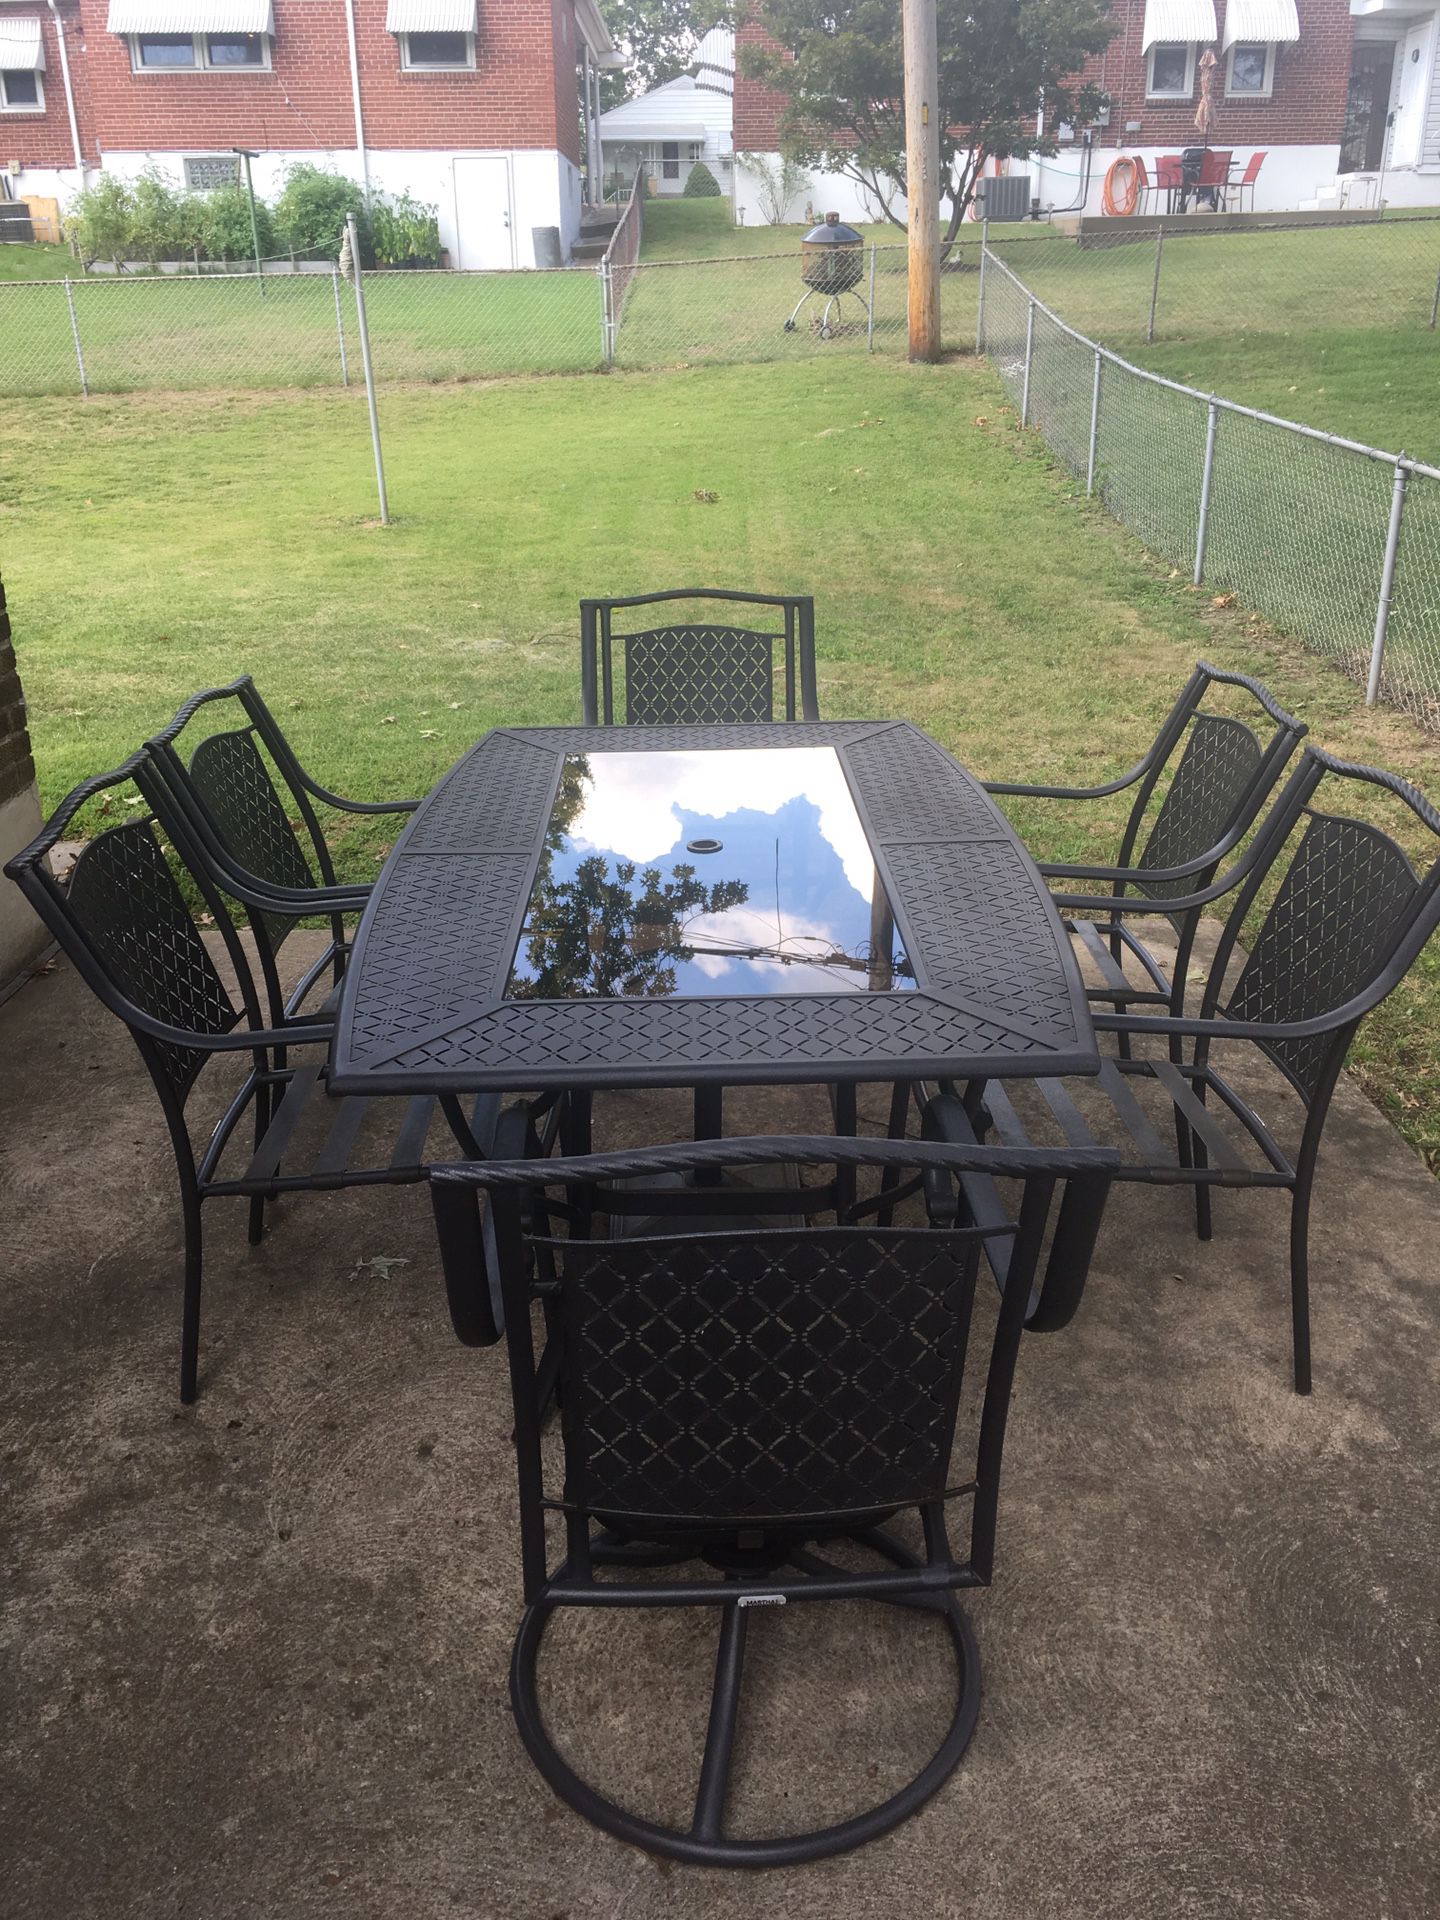 7 Piece Outdoor Patio Dining Set Table 6 Chairs Martha Stewart Living Mallorca No Cushions For Sale In St Louis Mo Offerup